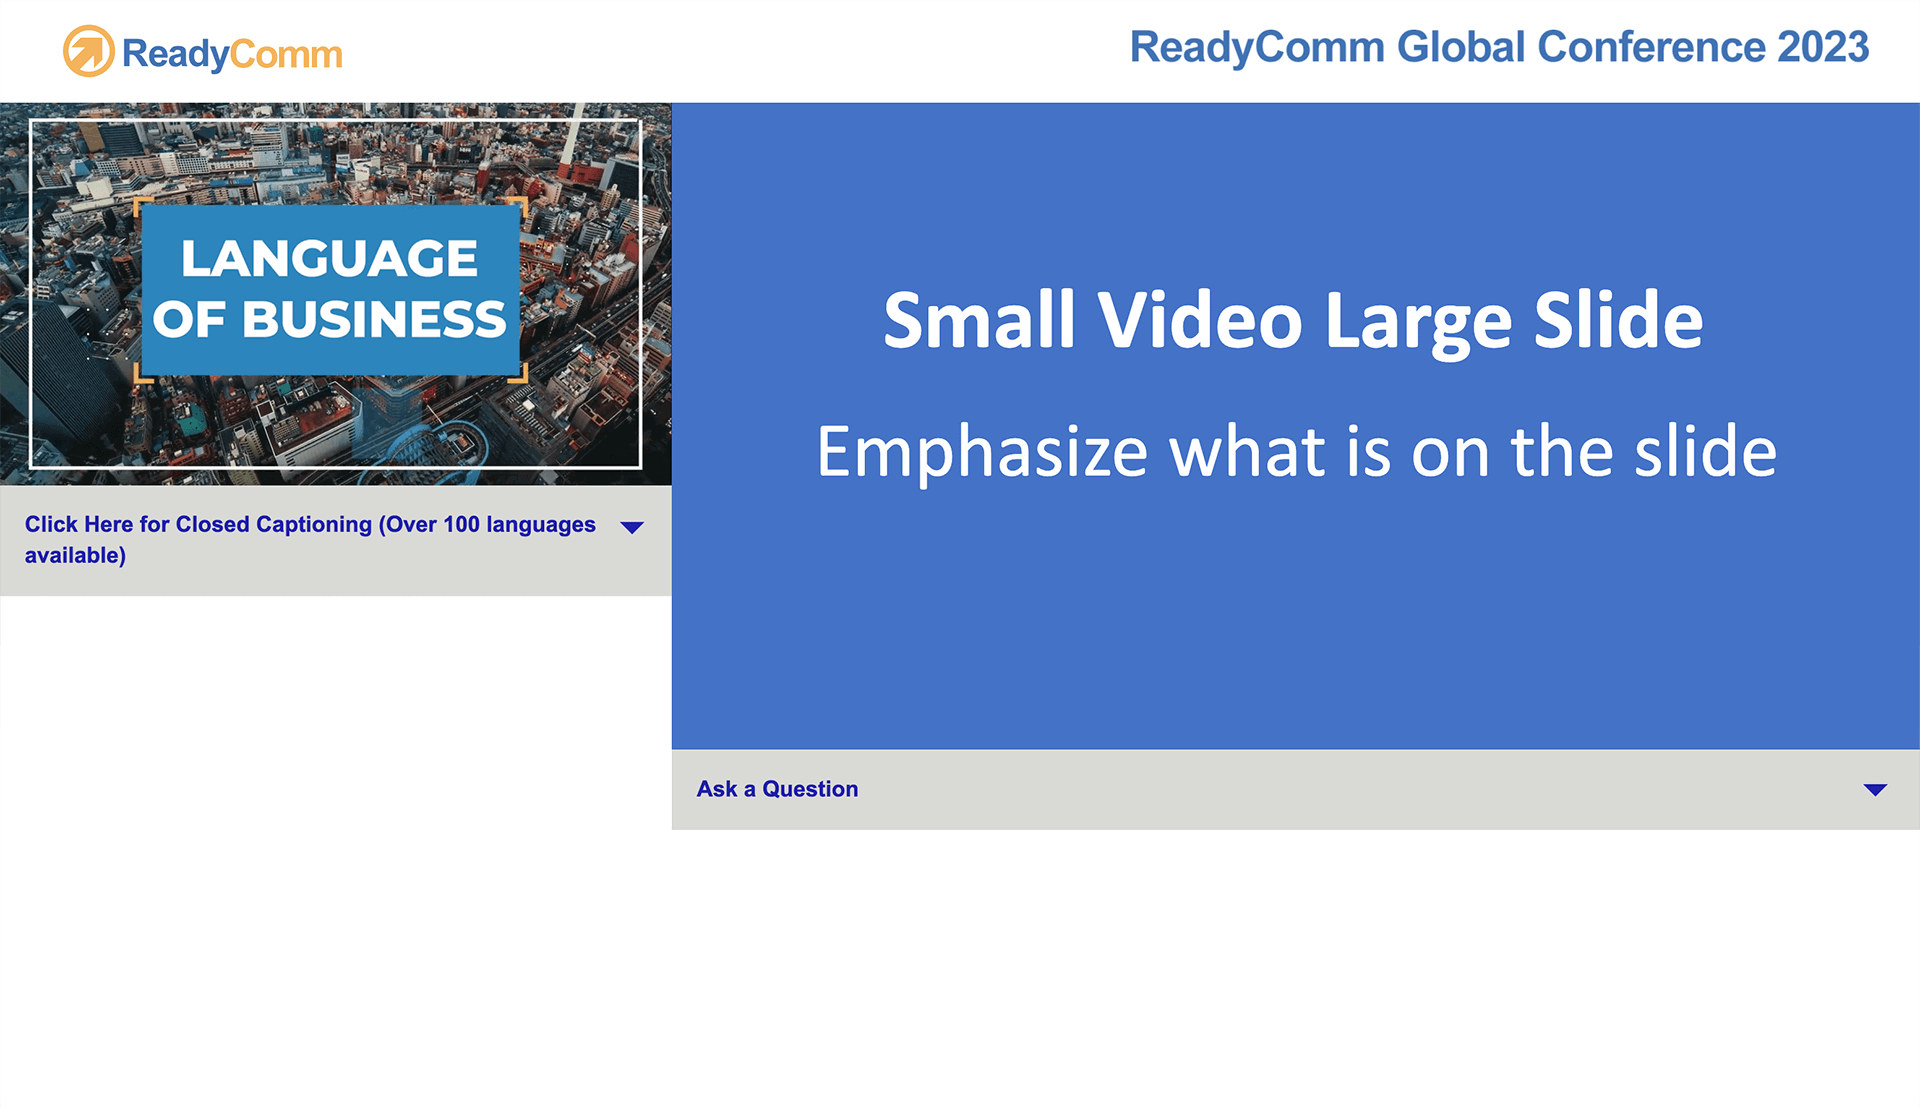 Small-Video-Large-Slide-Player-State-Small-New